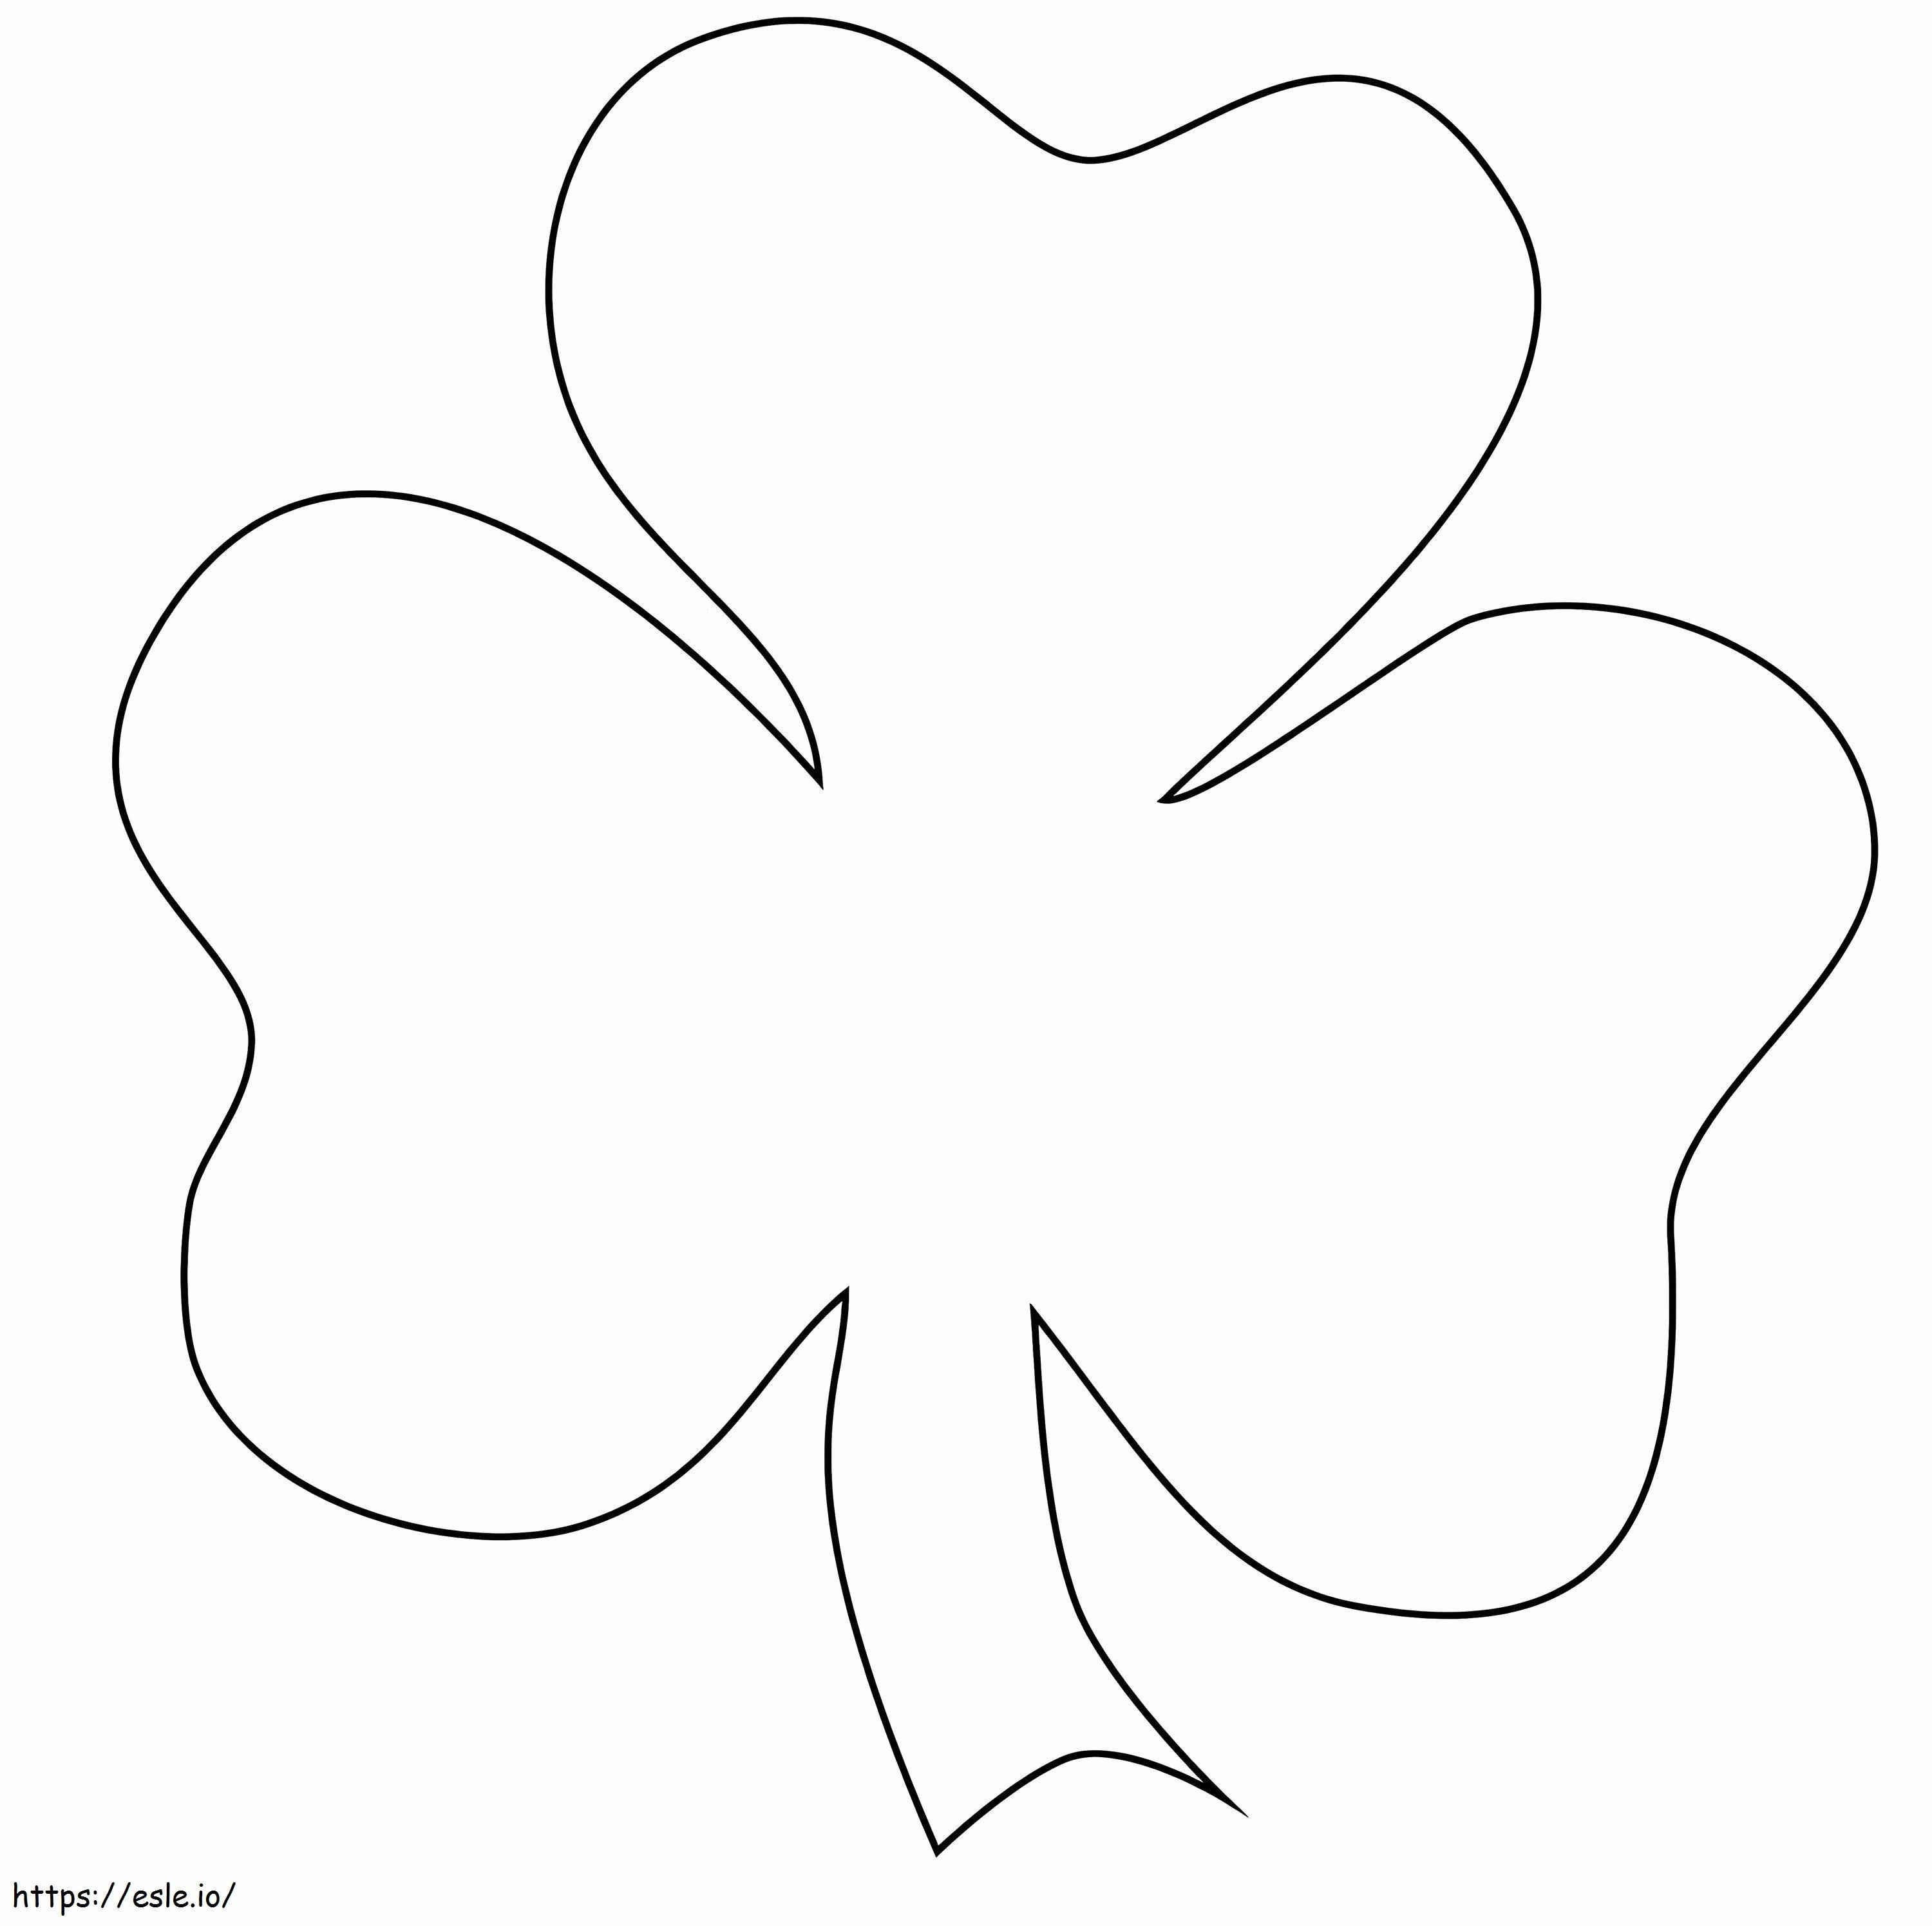 Easy Clover 1 coloring page